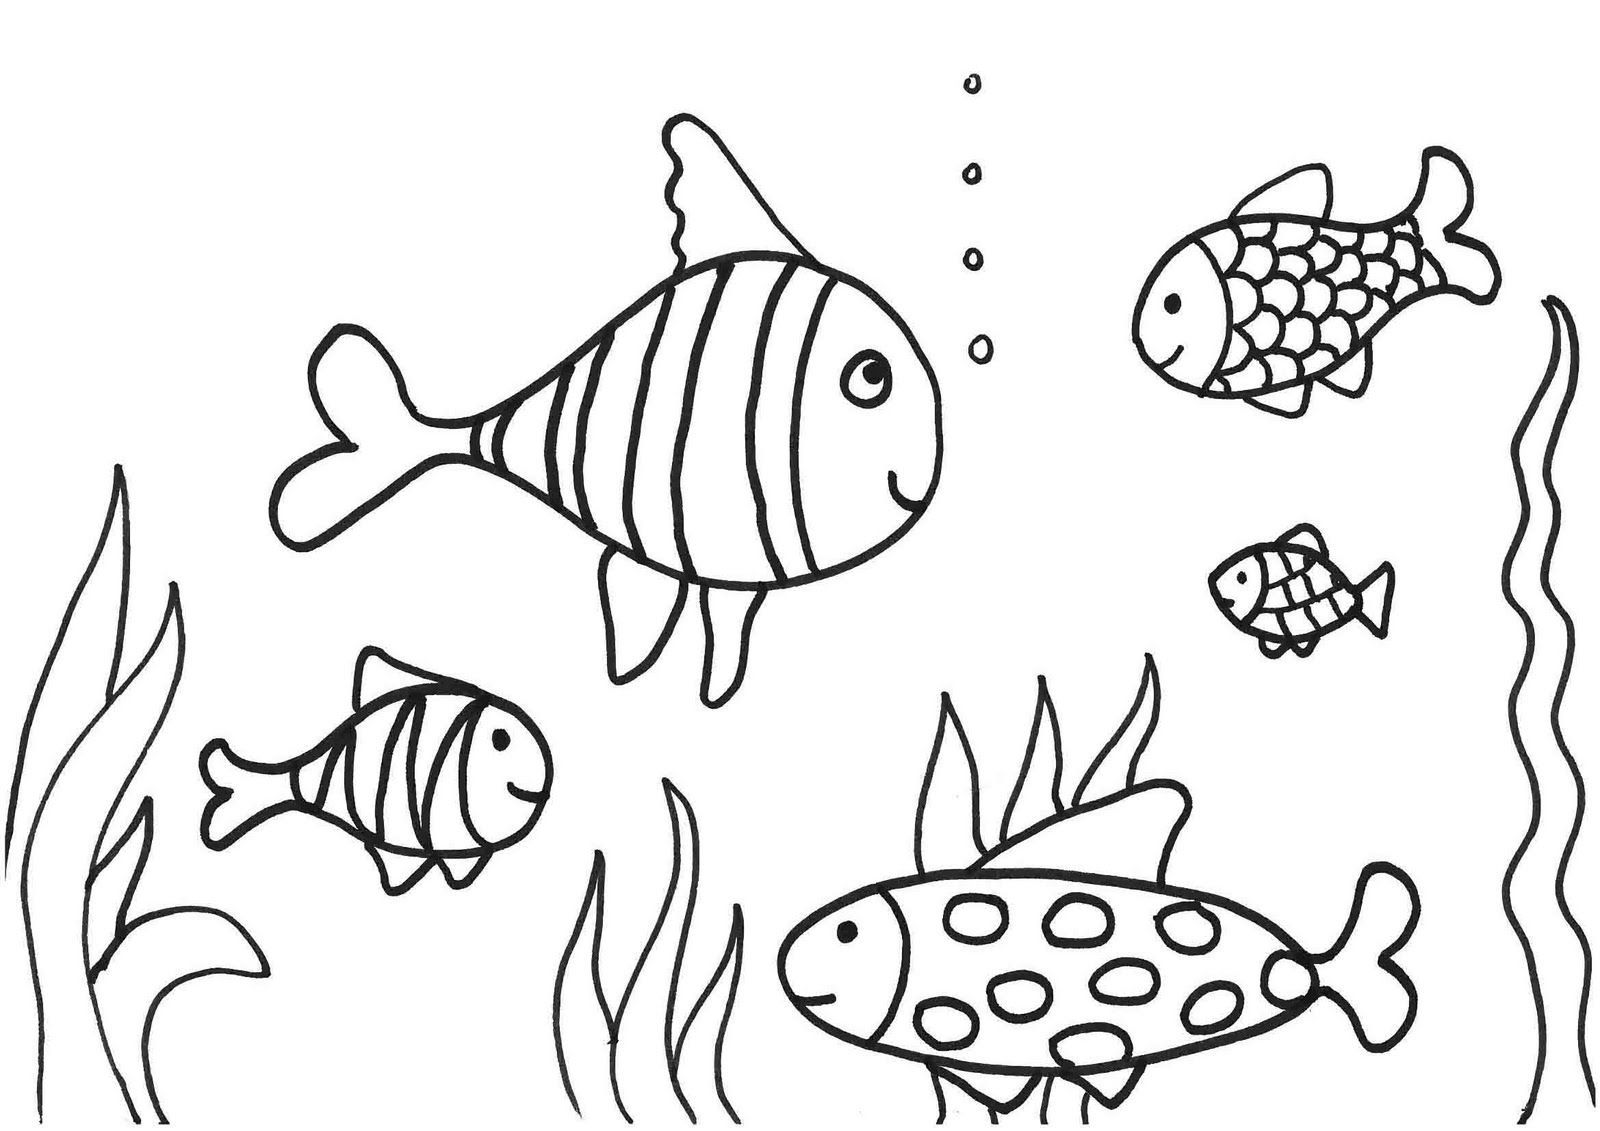 5 Loaves 2 Fish Coloring Page Home